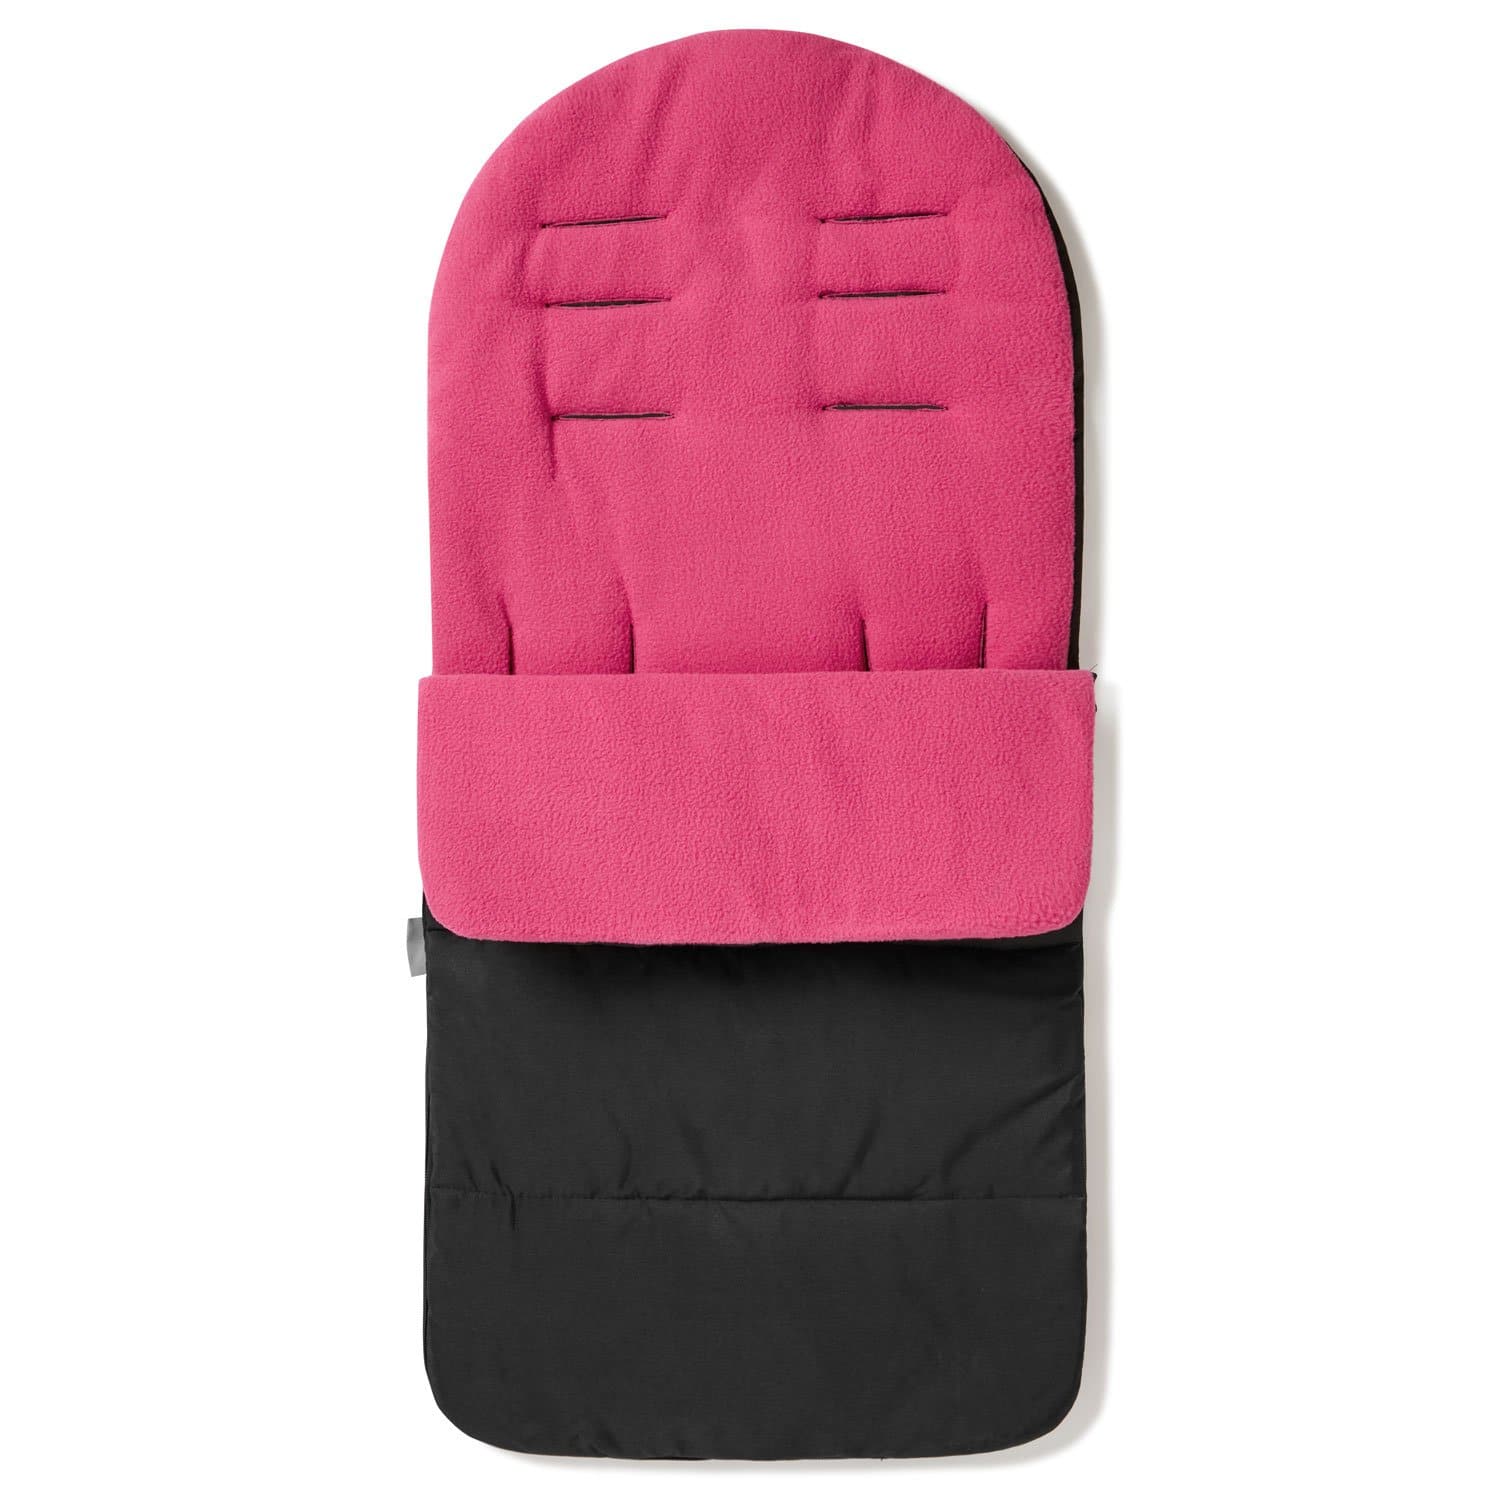 Premium Footmuff / Cosy Toes Compatible with BabiesRus - Pink Rose / Fits All Models | For Your Little One